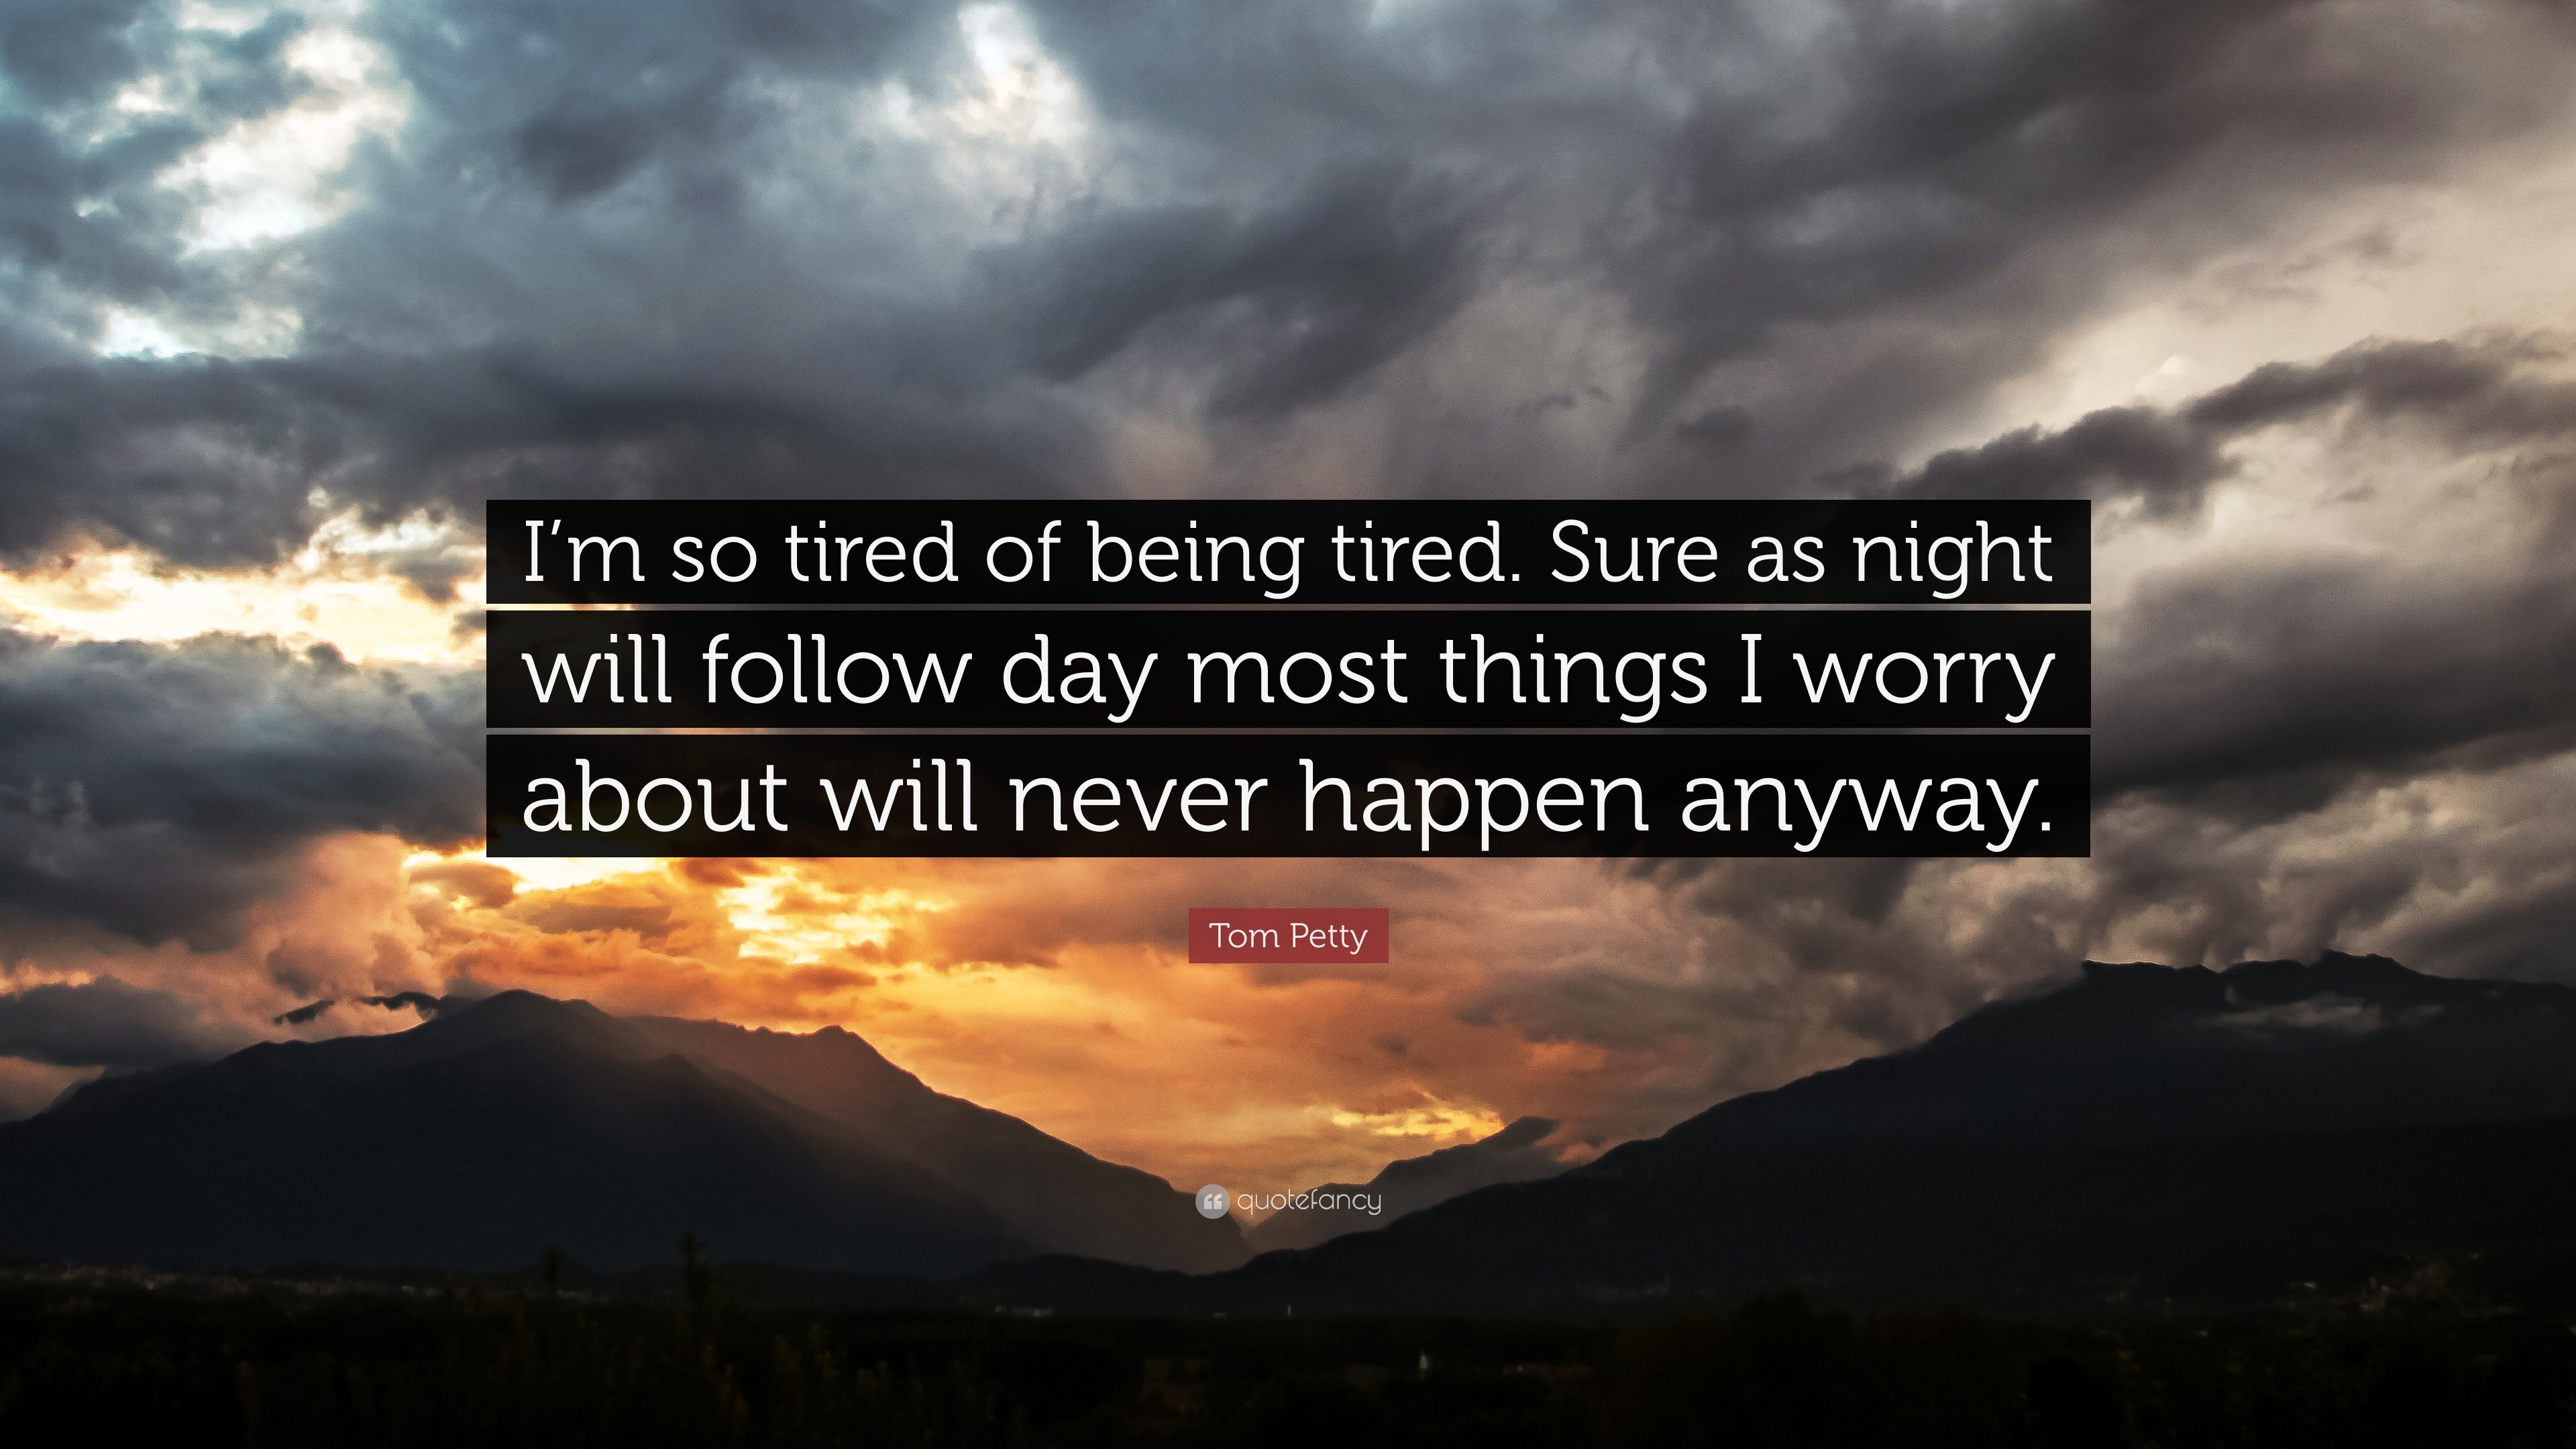 Tom Petty Quote: “I’m so tired of being tired. Sure as night will